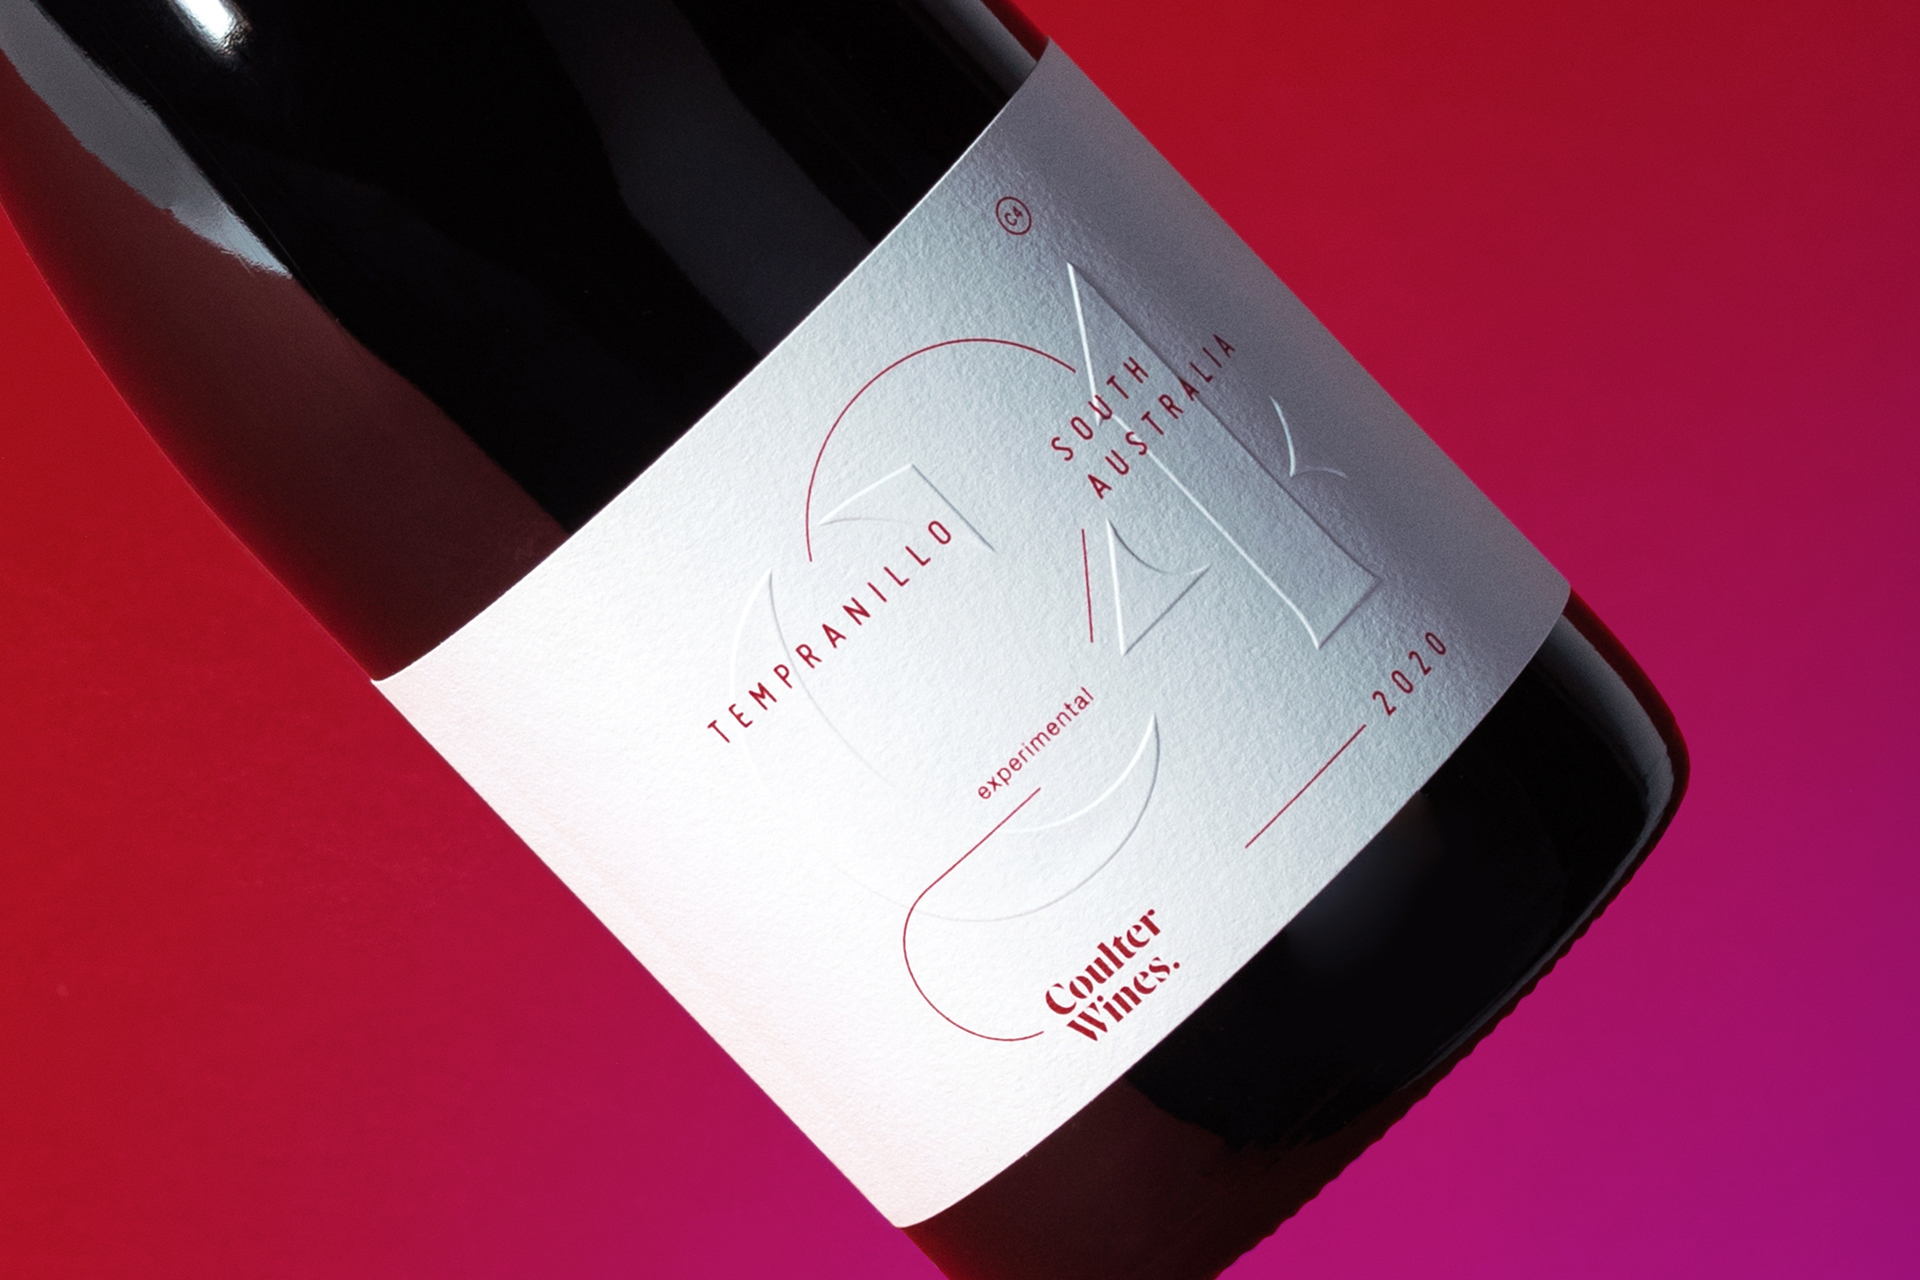 Coulter Wines Experiment Range Label Design by Ocho Creative